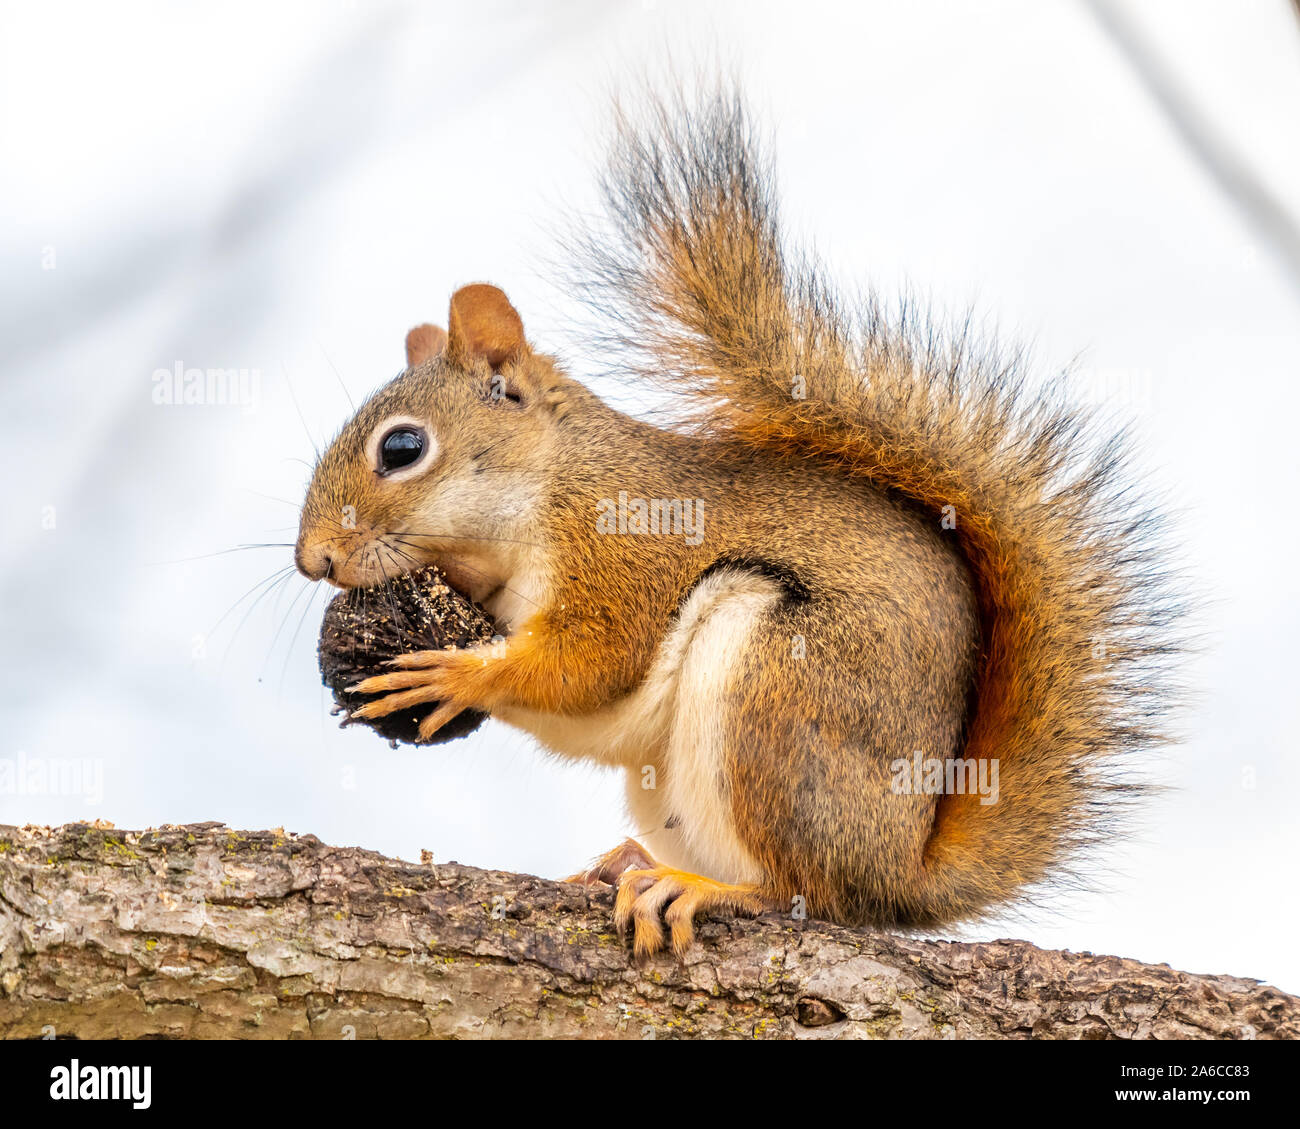 An American Red Squirrel (Tamiasciurus hudsonicus) eating a nut on a tree branch. Stock Photo